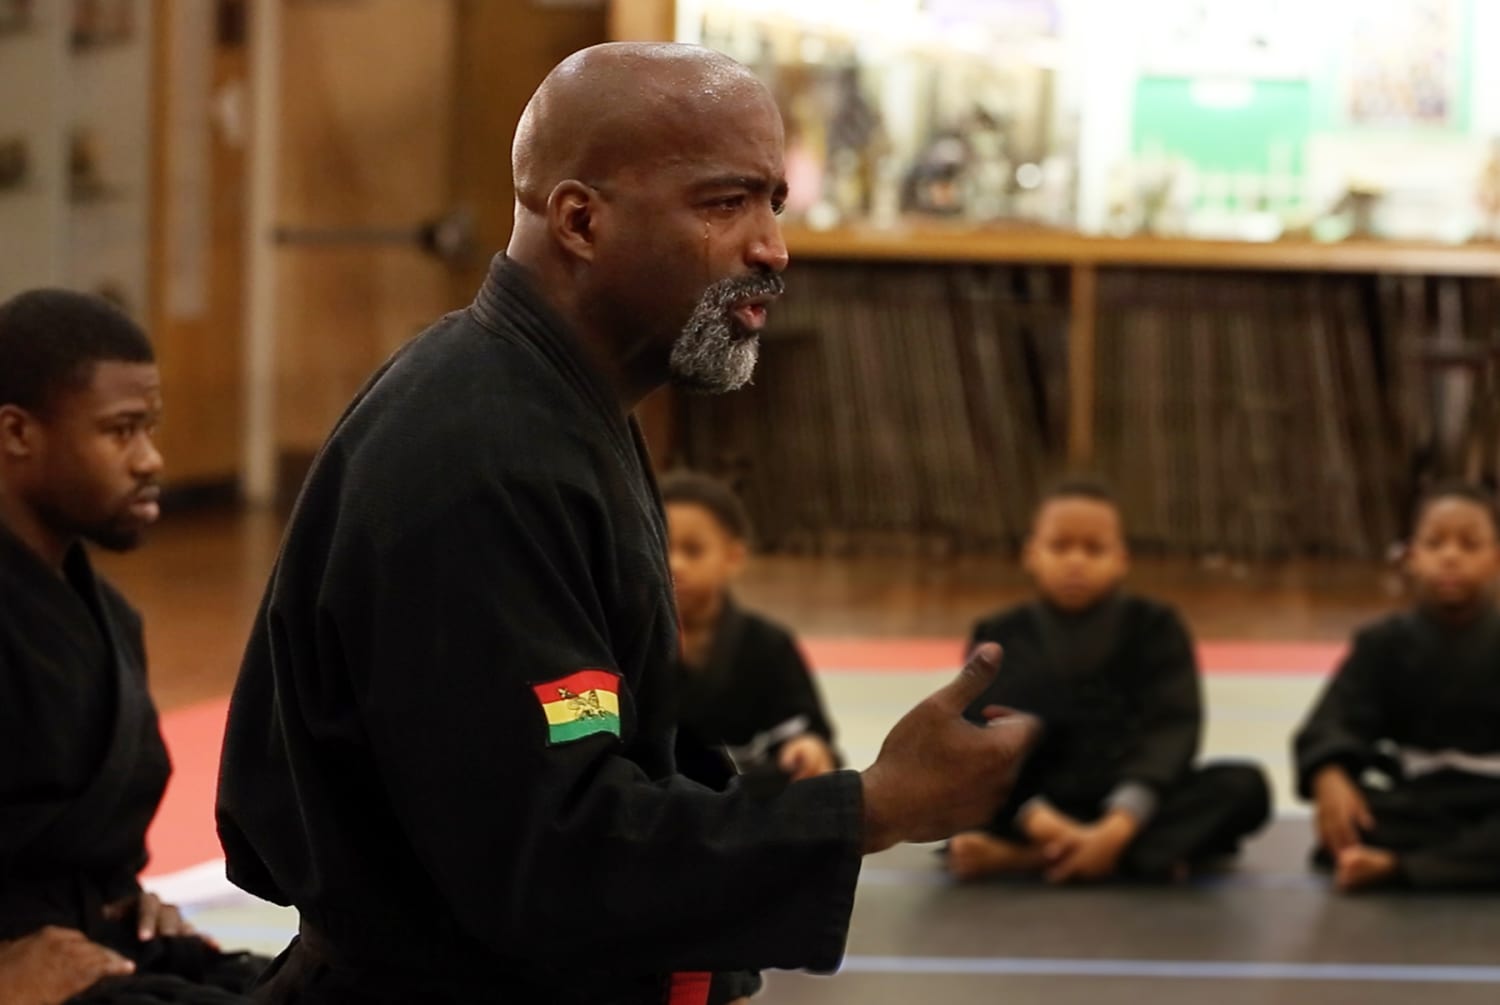 Martial arts teacher consoles tearful boy, reminds us all 'it's OK to cry